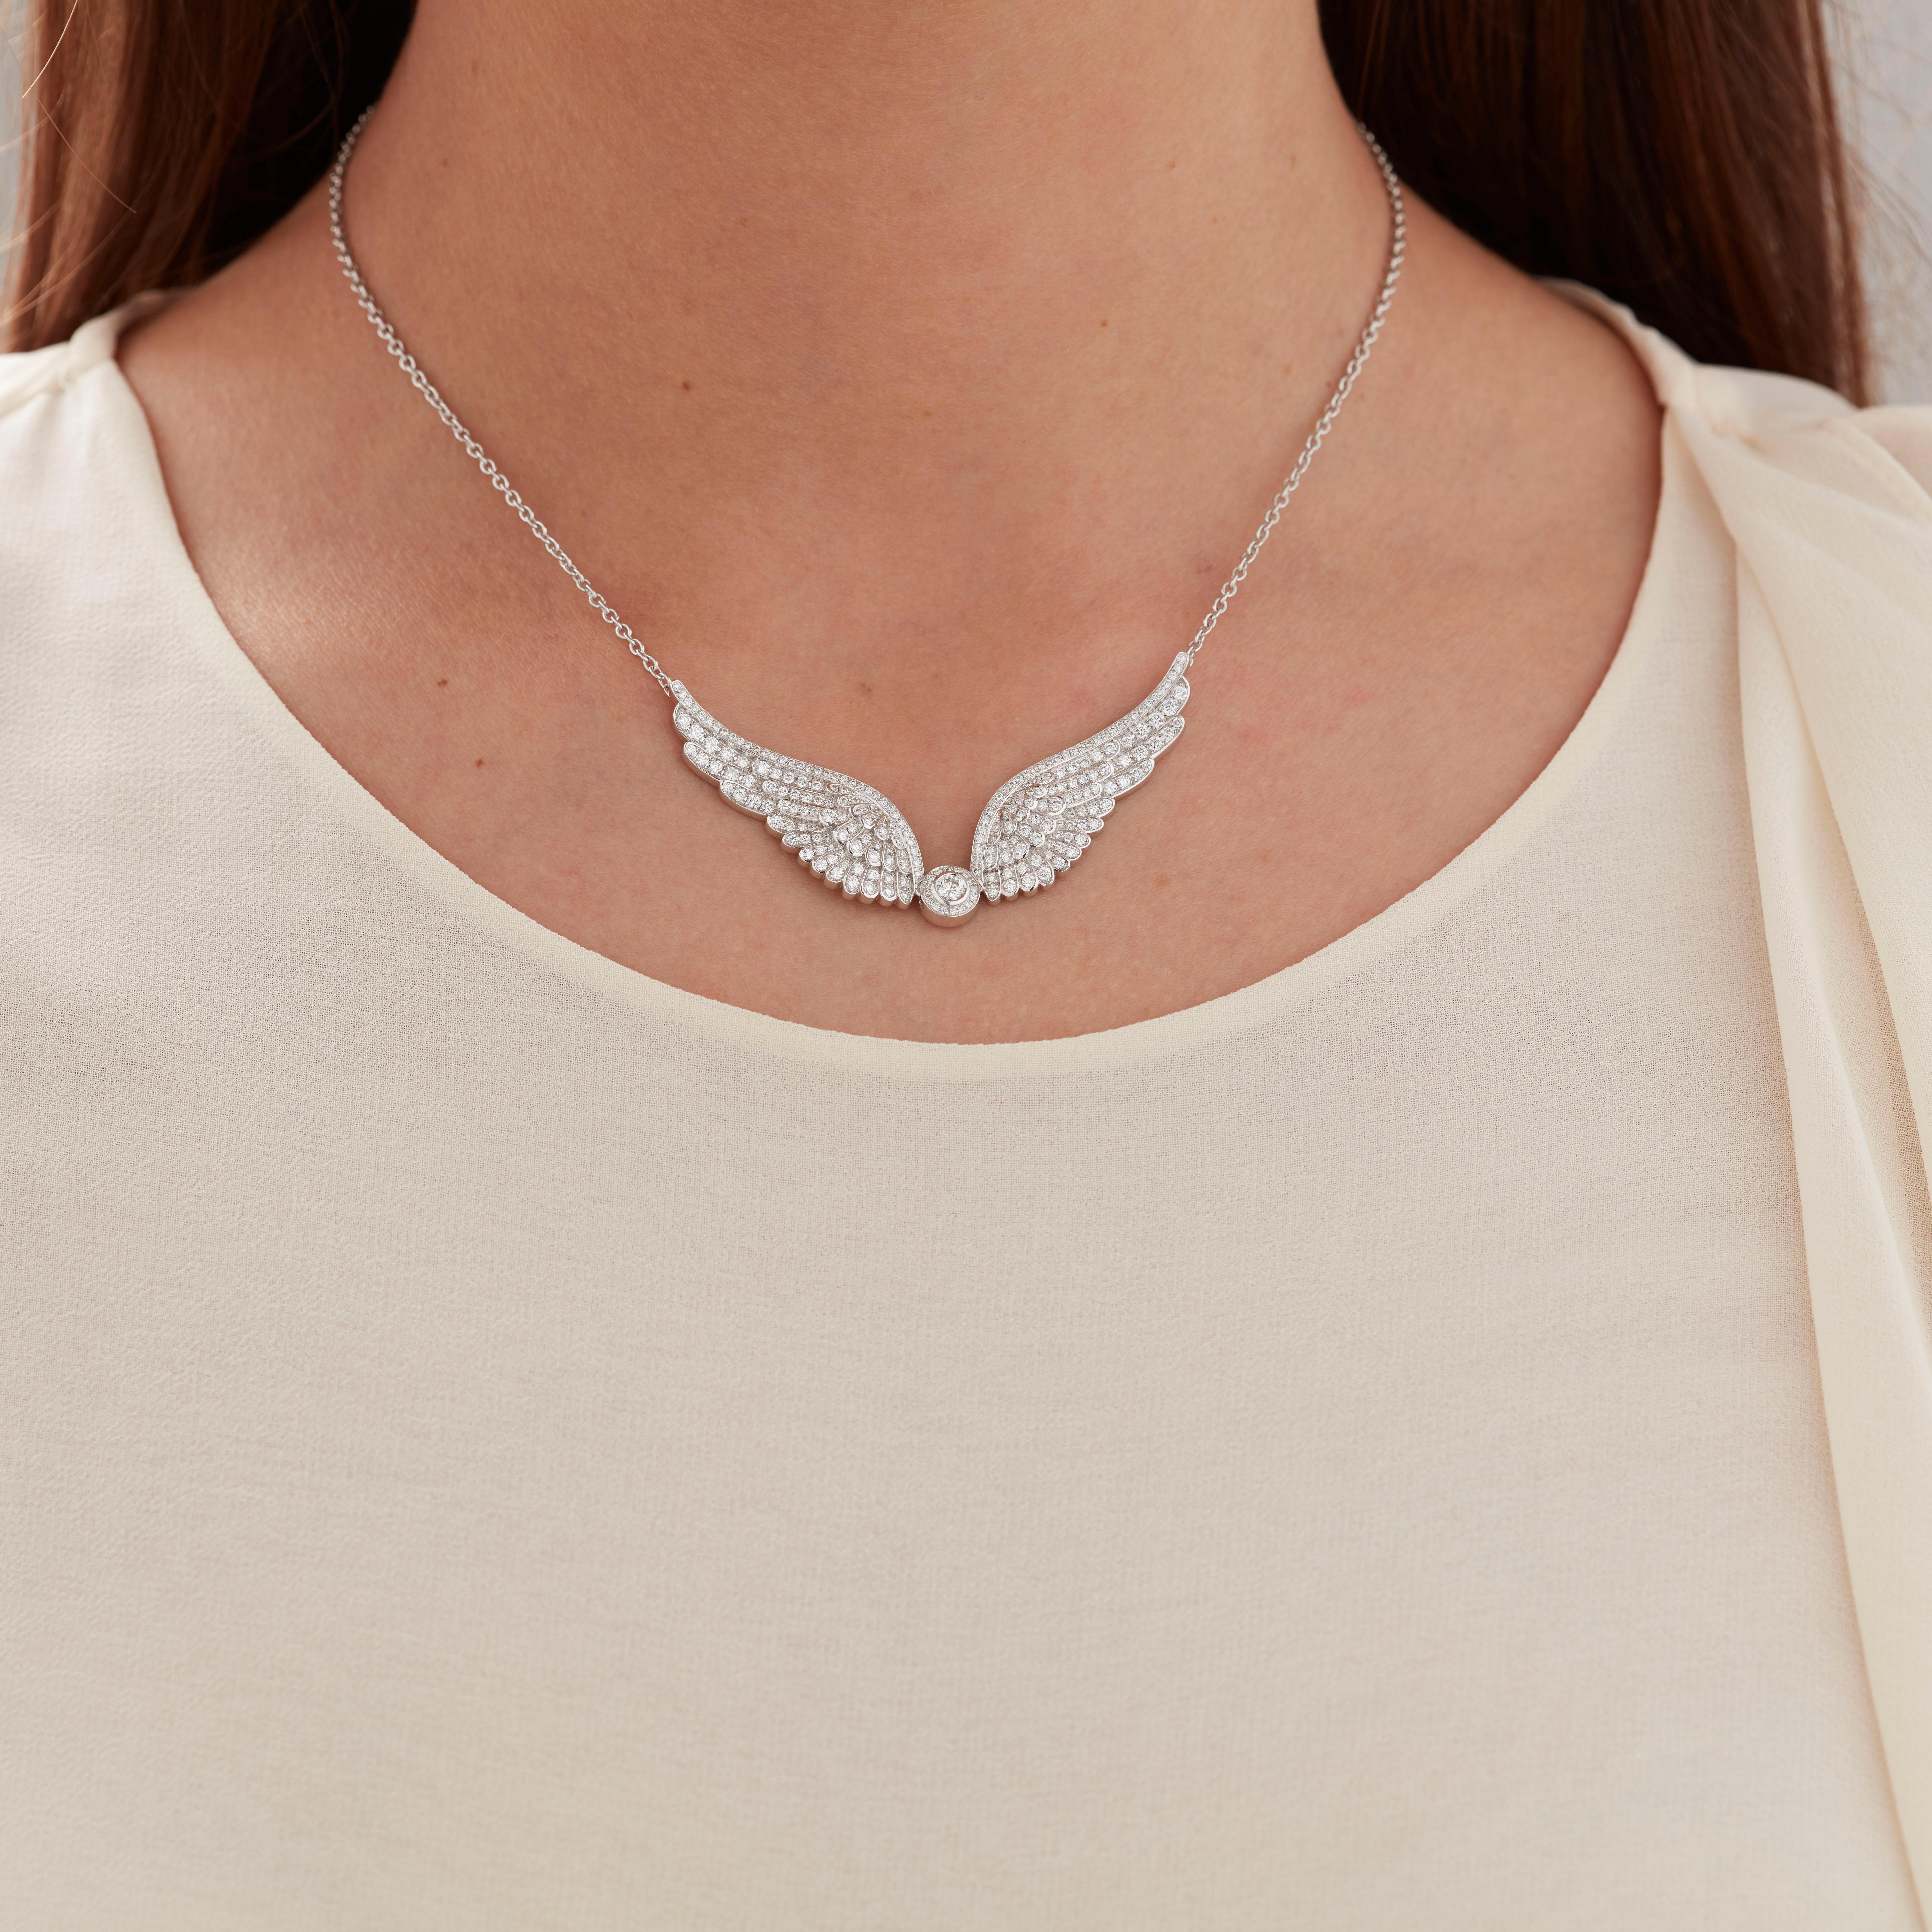 A House of Garrard 18 karat white gold necklace from the 'Wings Classic' collection, set with round white diamonds.

250 round white diamonds weighing: 1.85cts

The House of Garrard is the longest serving jeweller in the world. The creative hub of